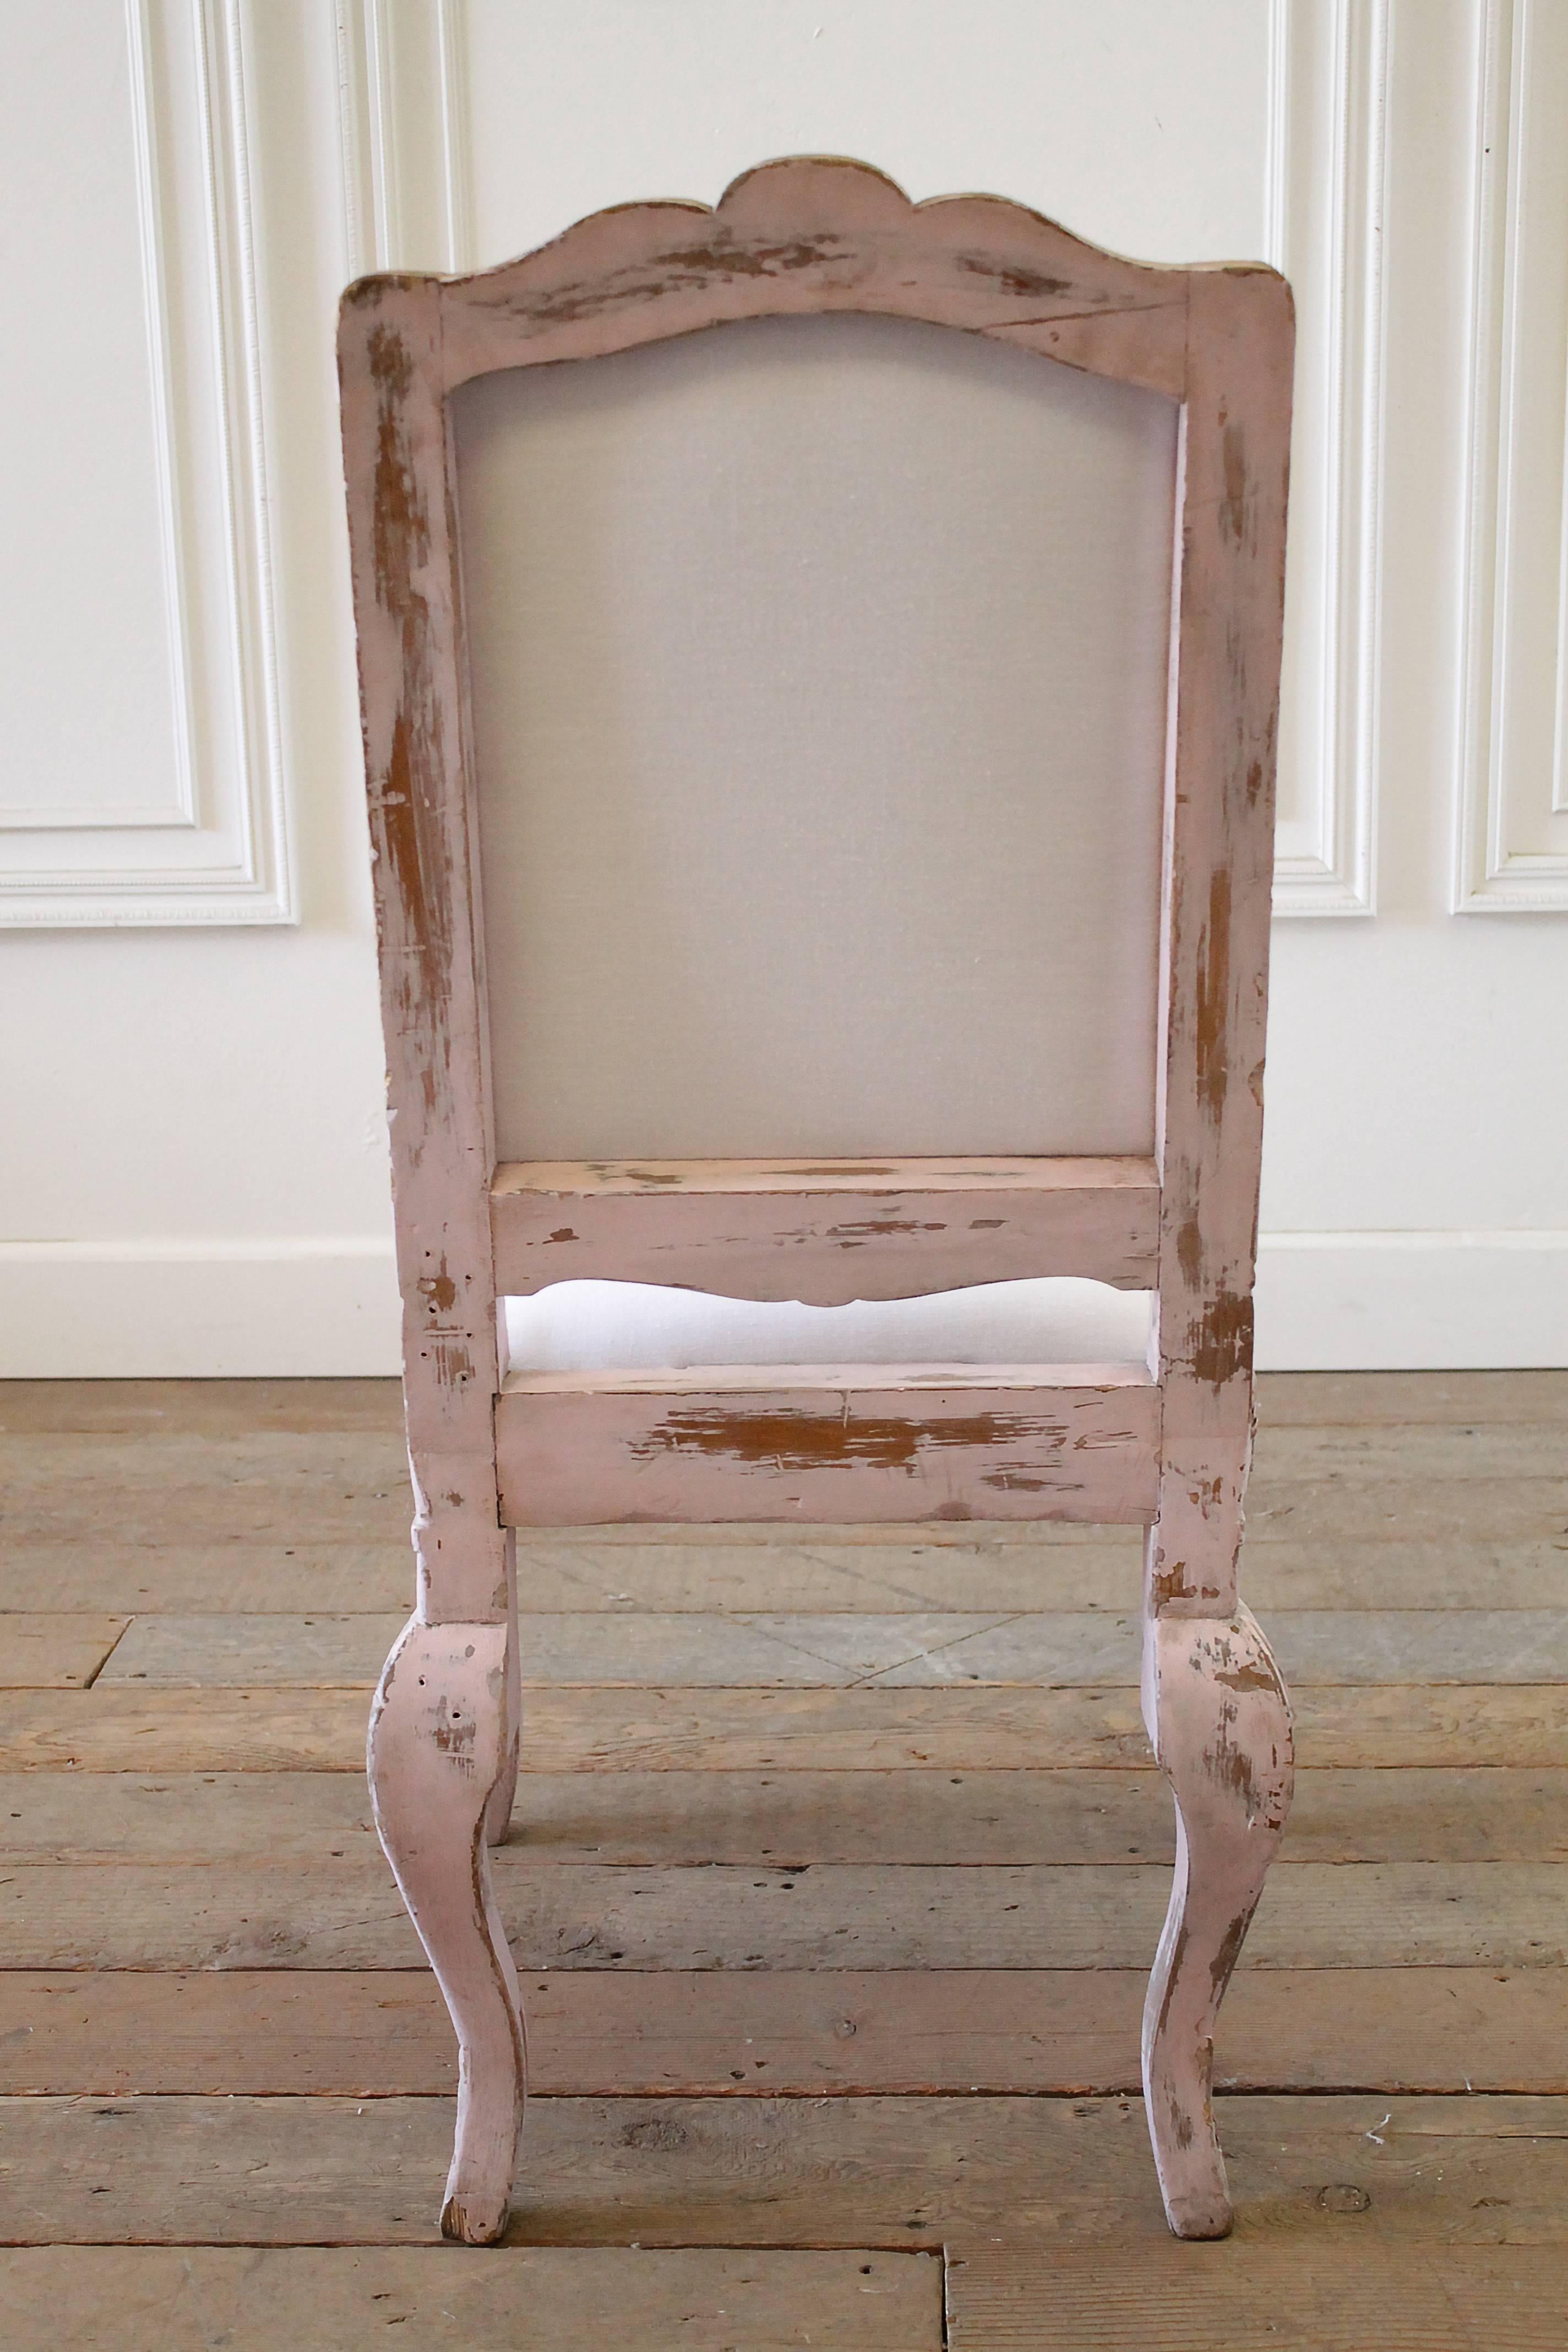 Antique French Vanity Chair Painted in a Pale Pink and White Belgian Linen In Good Condition For Sale In Brea, CA